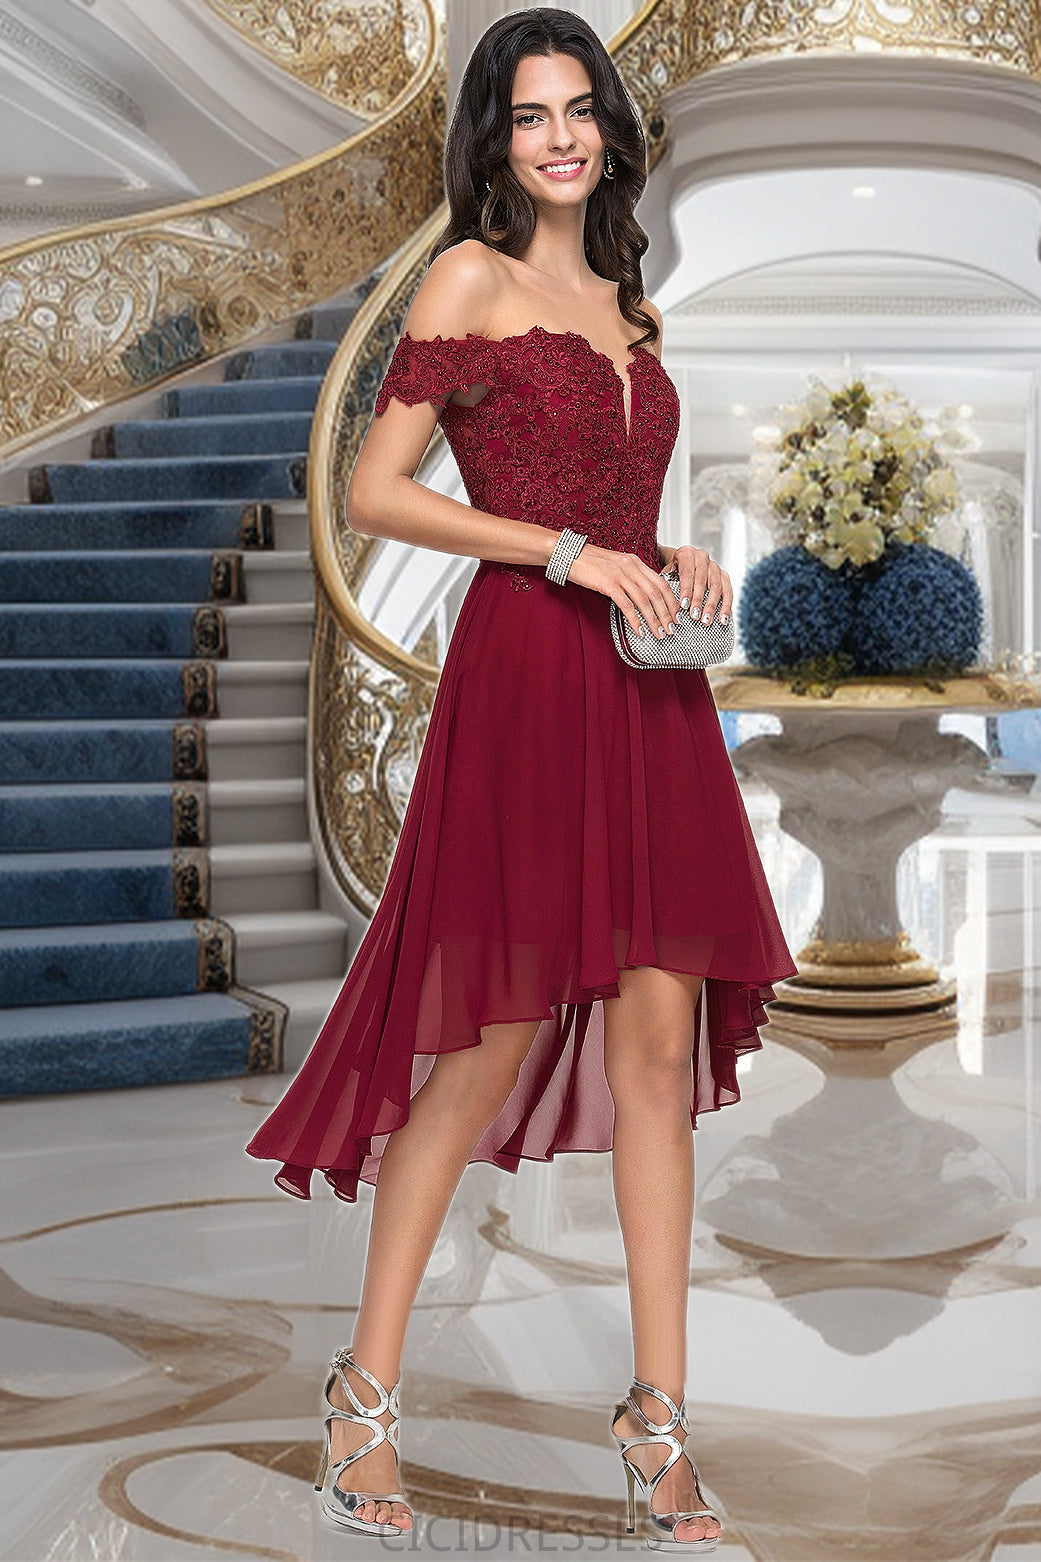 Charlize A-line Off the Shoulder Asymmetrical Chiffon Homecoming Dress With Beading CIC8P0020582